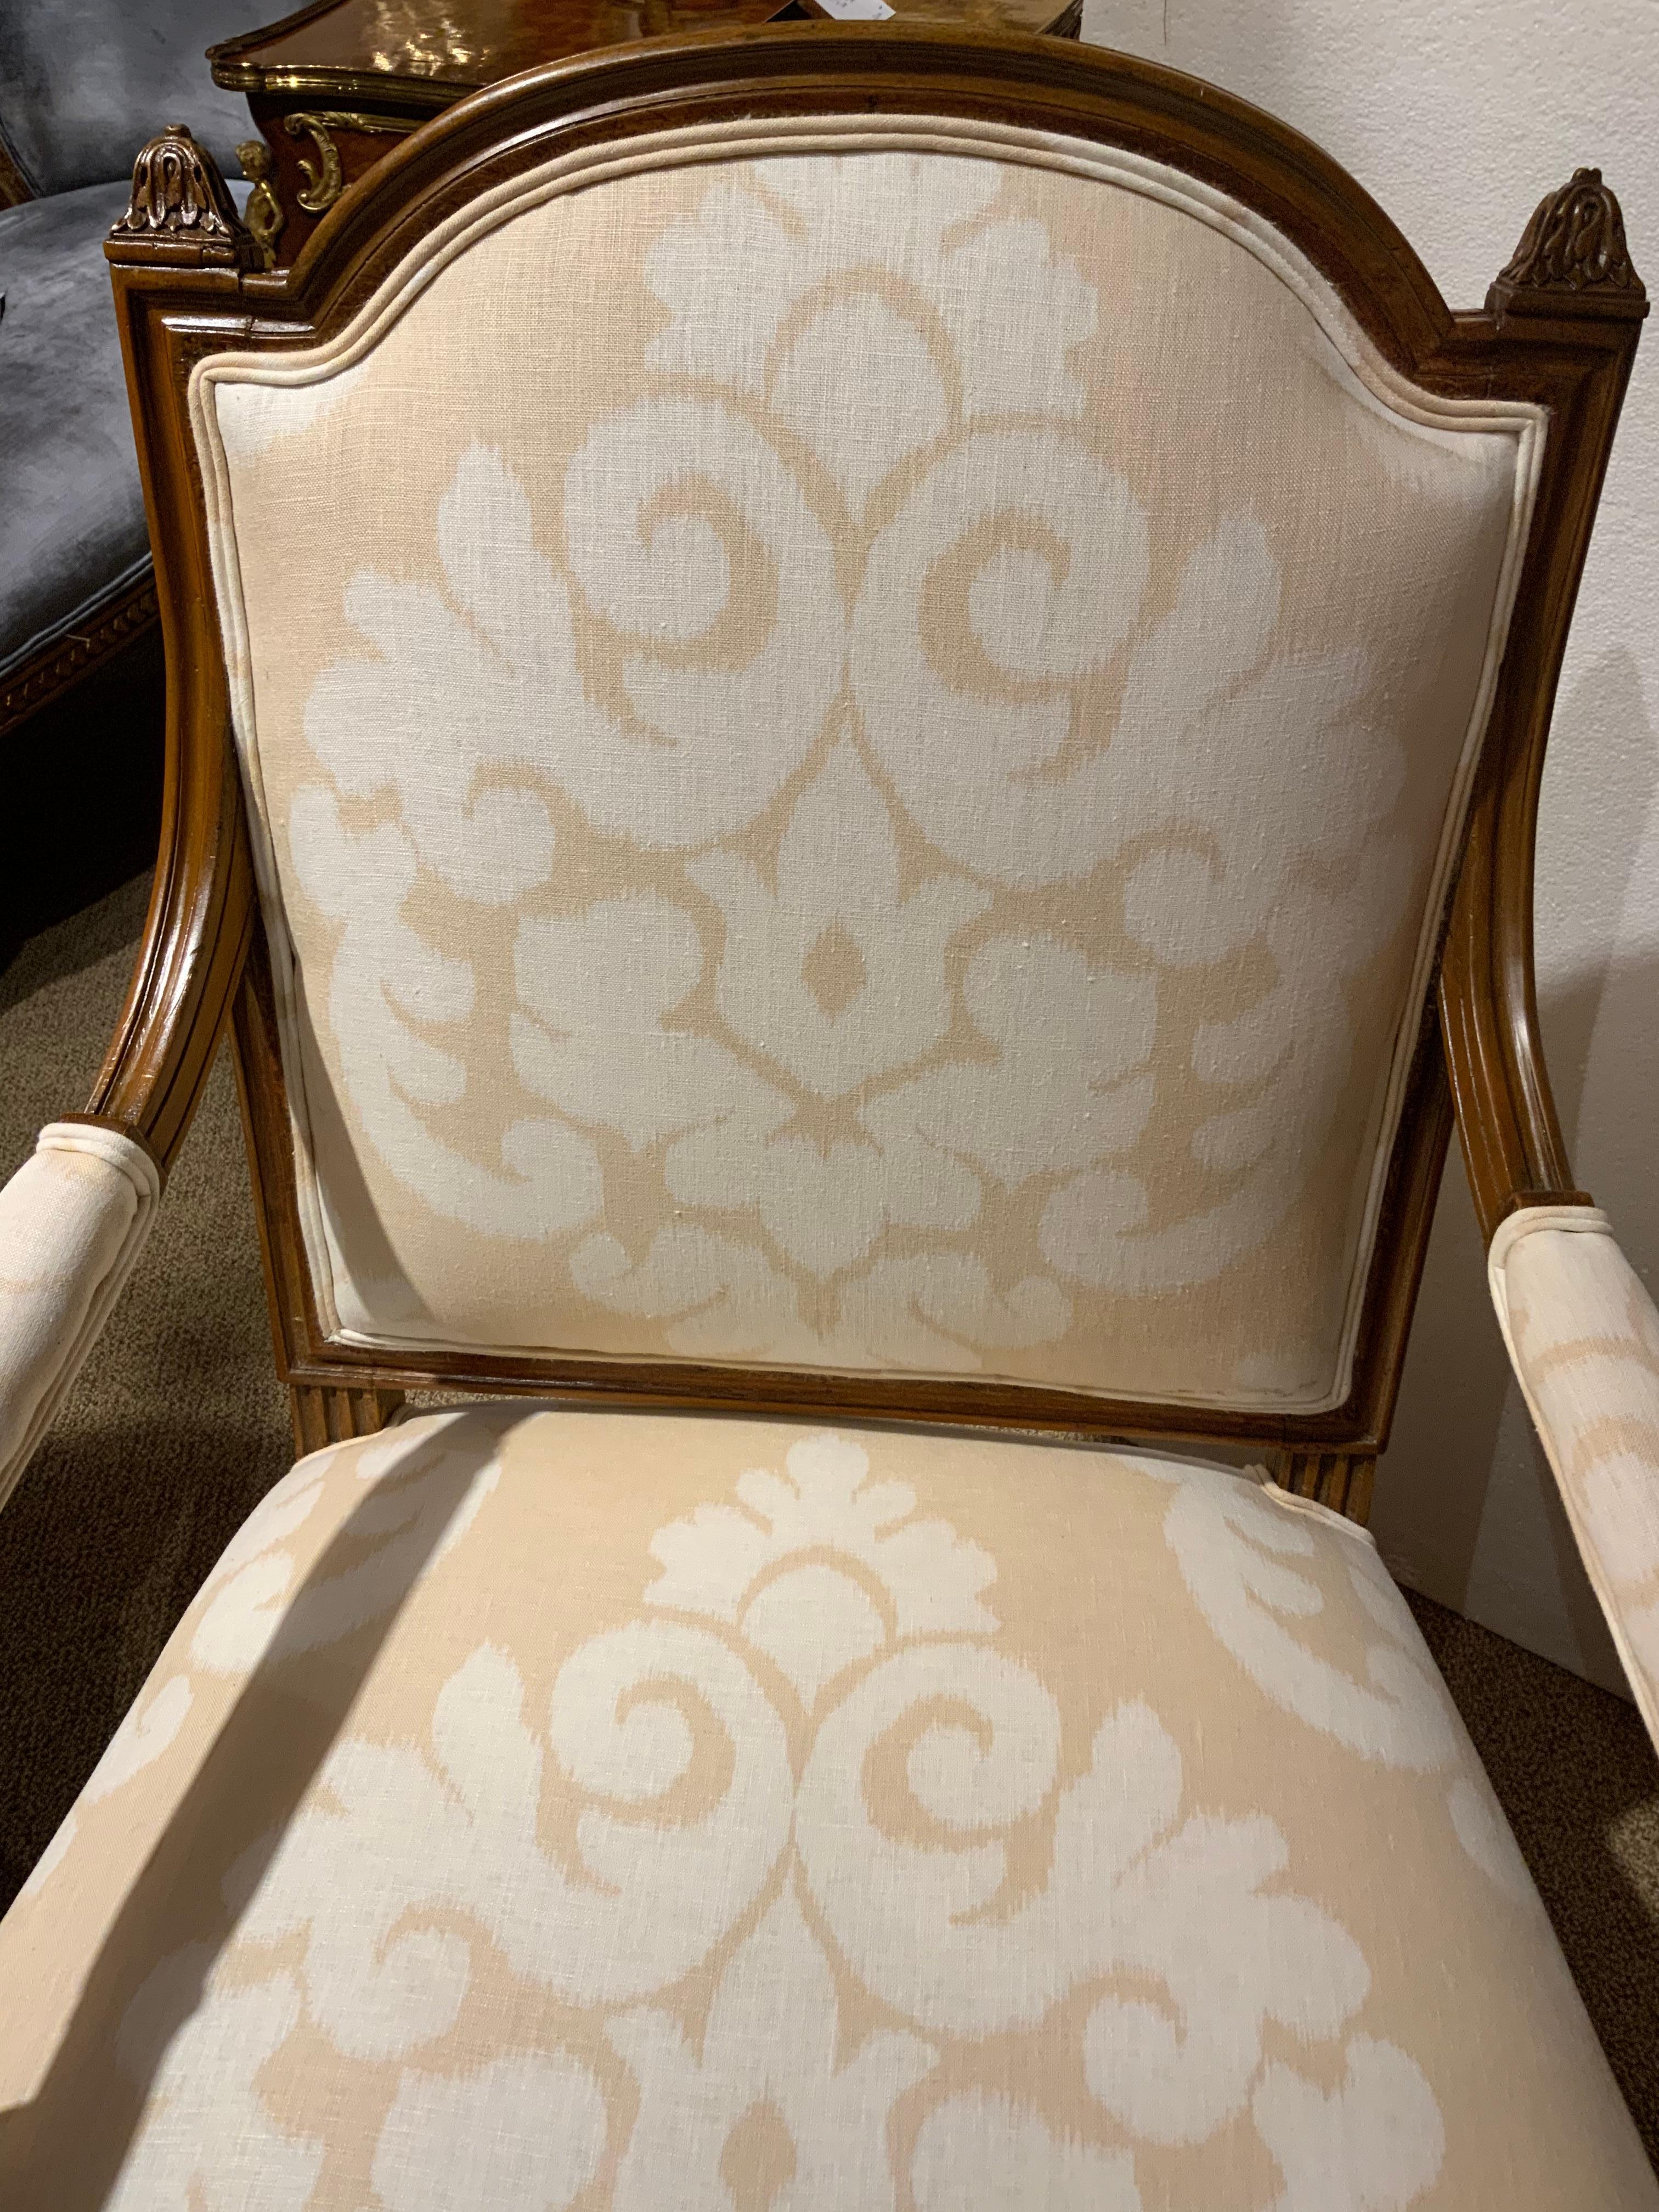 This pair of walnut Louis XVI -Style chairs have great proportion 
With a slightly domed back that is padded. They are newly
Upholstered with a fine linen designer fabric. The finish on the
Wood is in a warm brown hue. The legs are reeded and